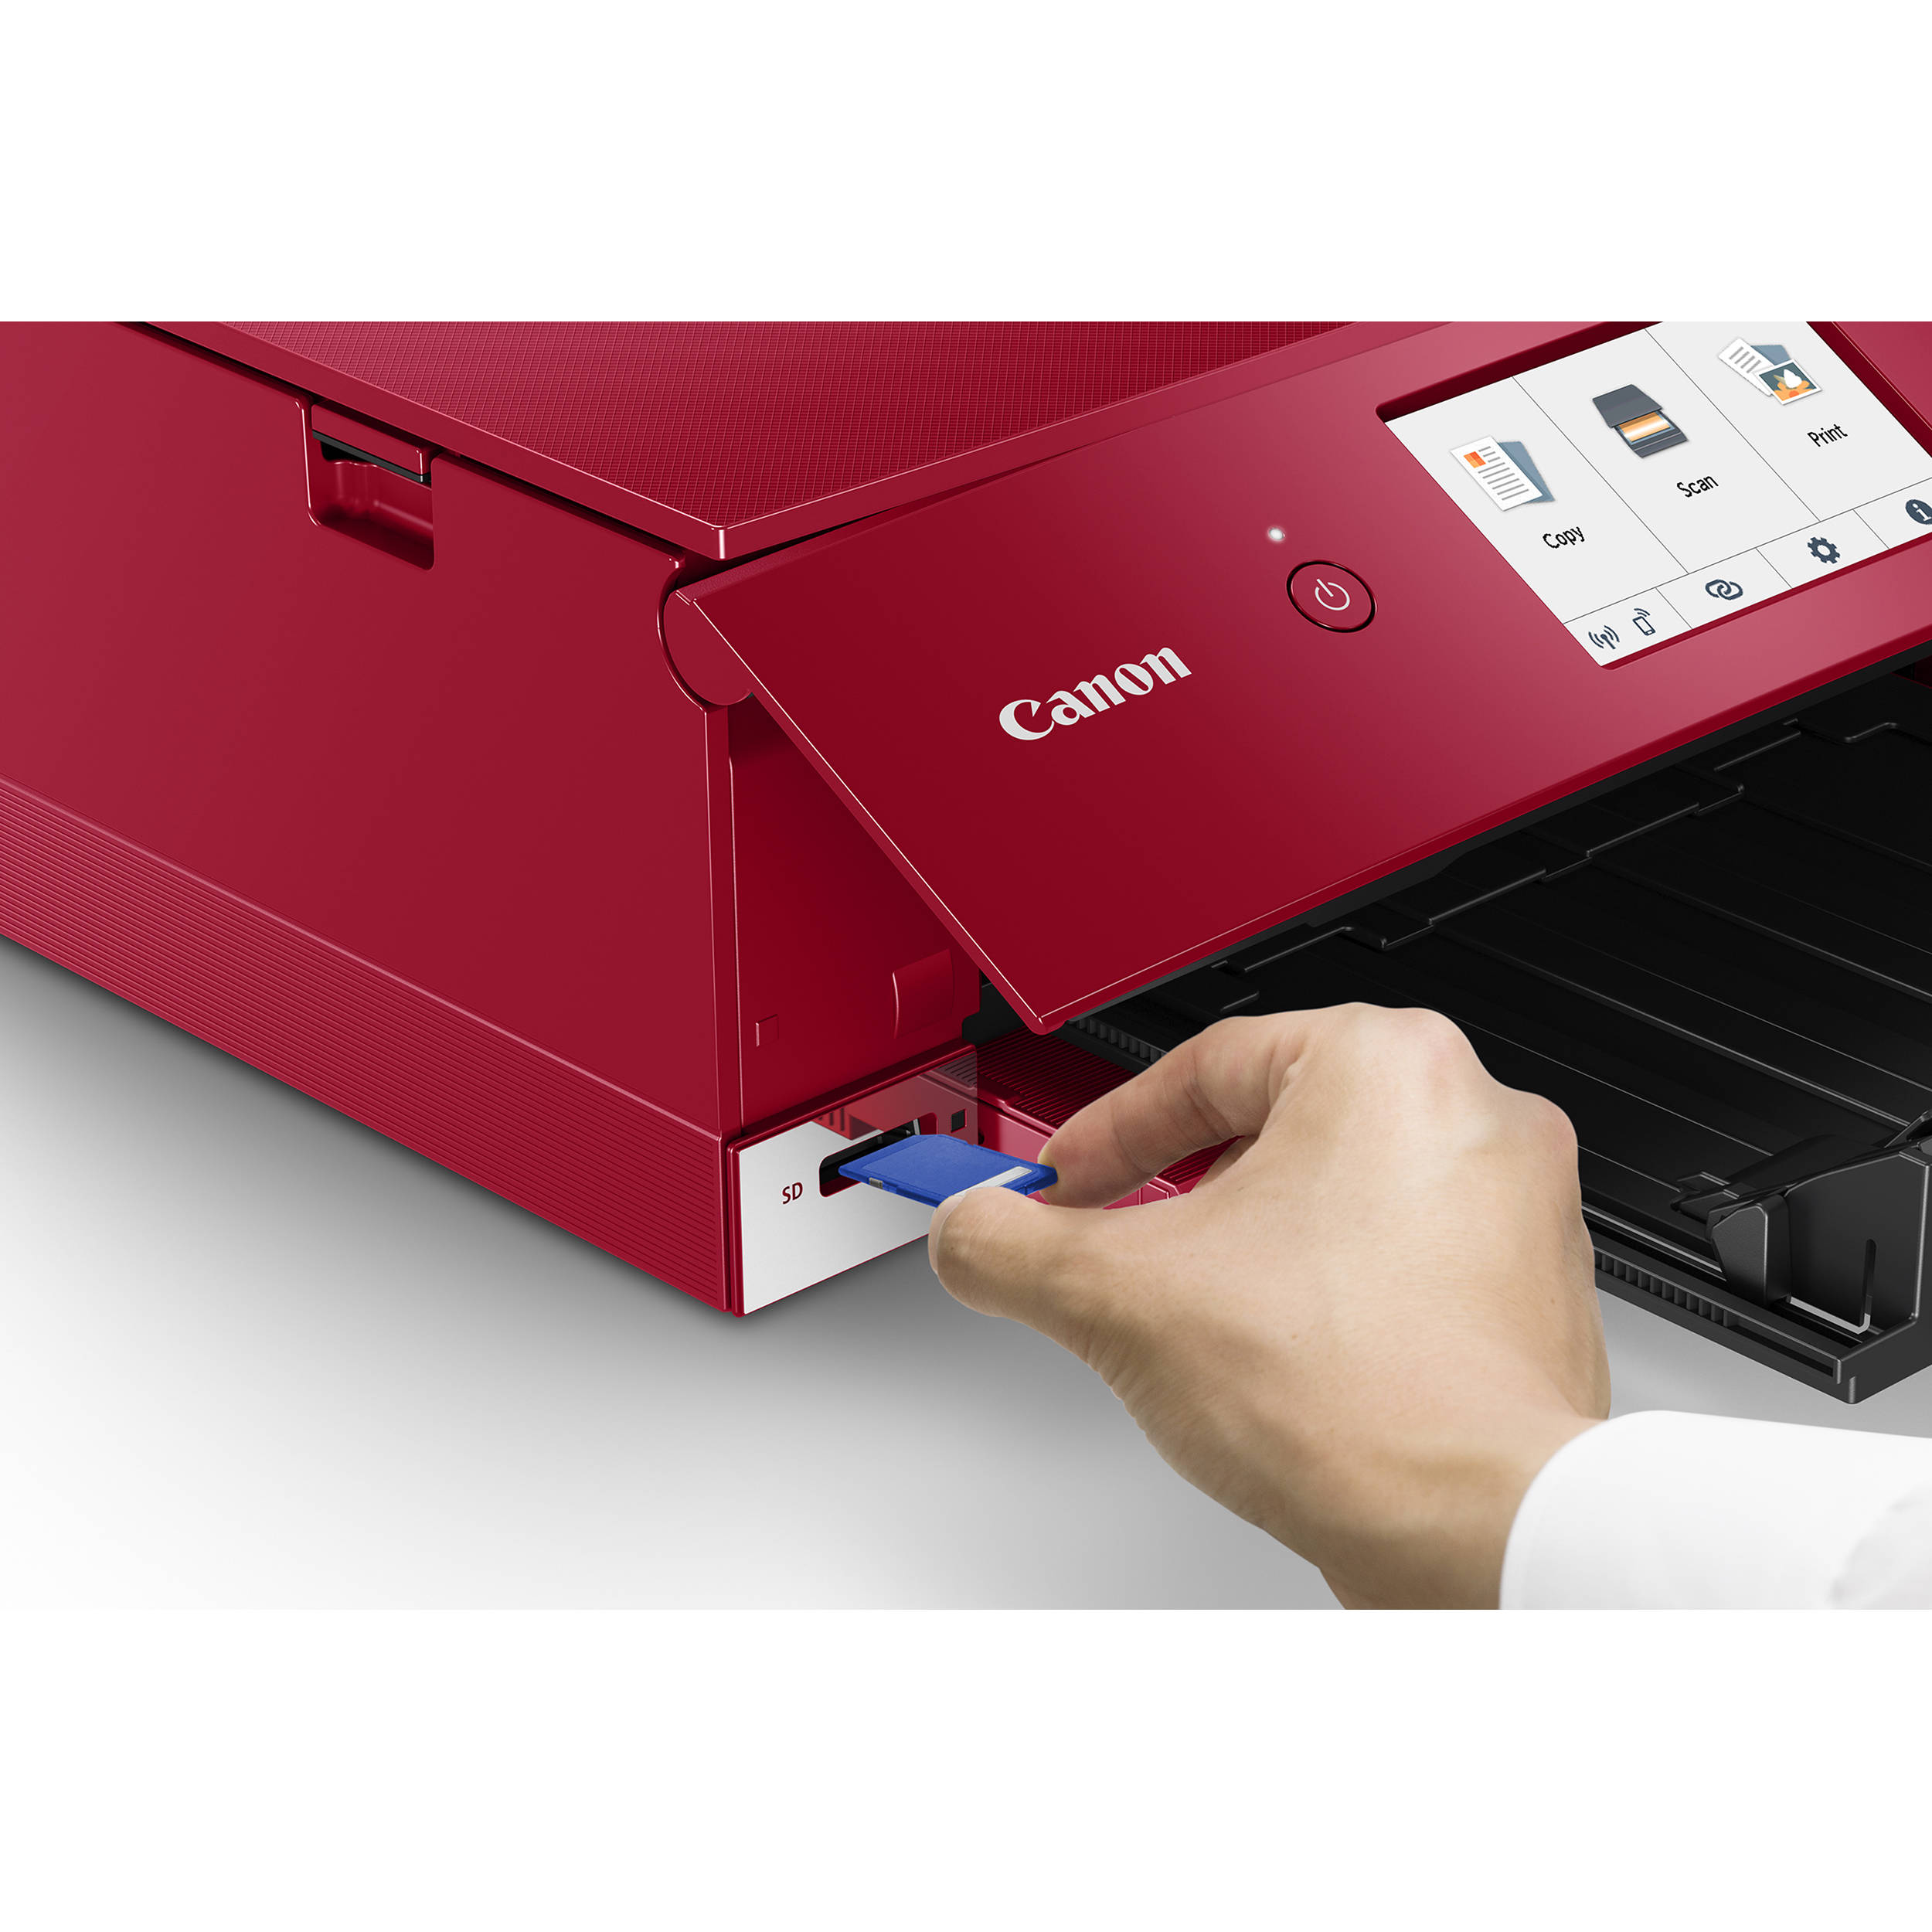 Scanner Copier Canon PIXMA TS8320 Inkjet Wireless Color Printer All In One Red